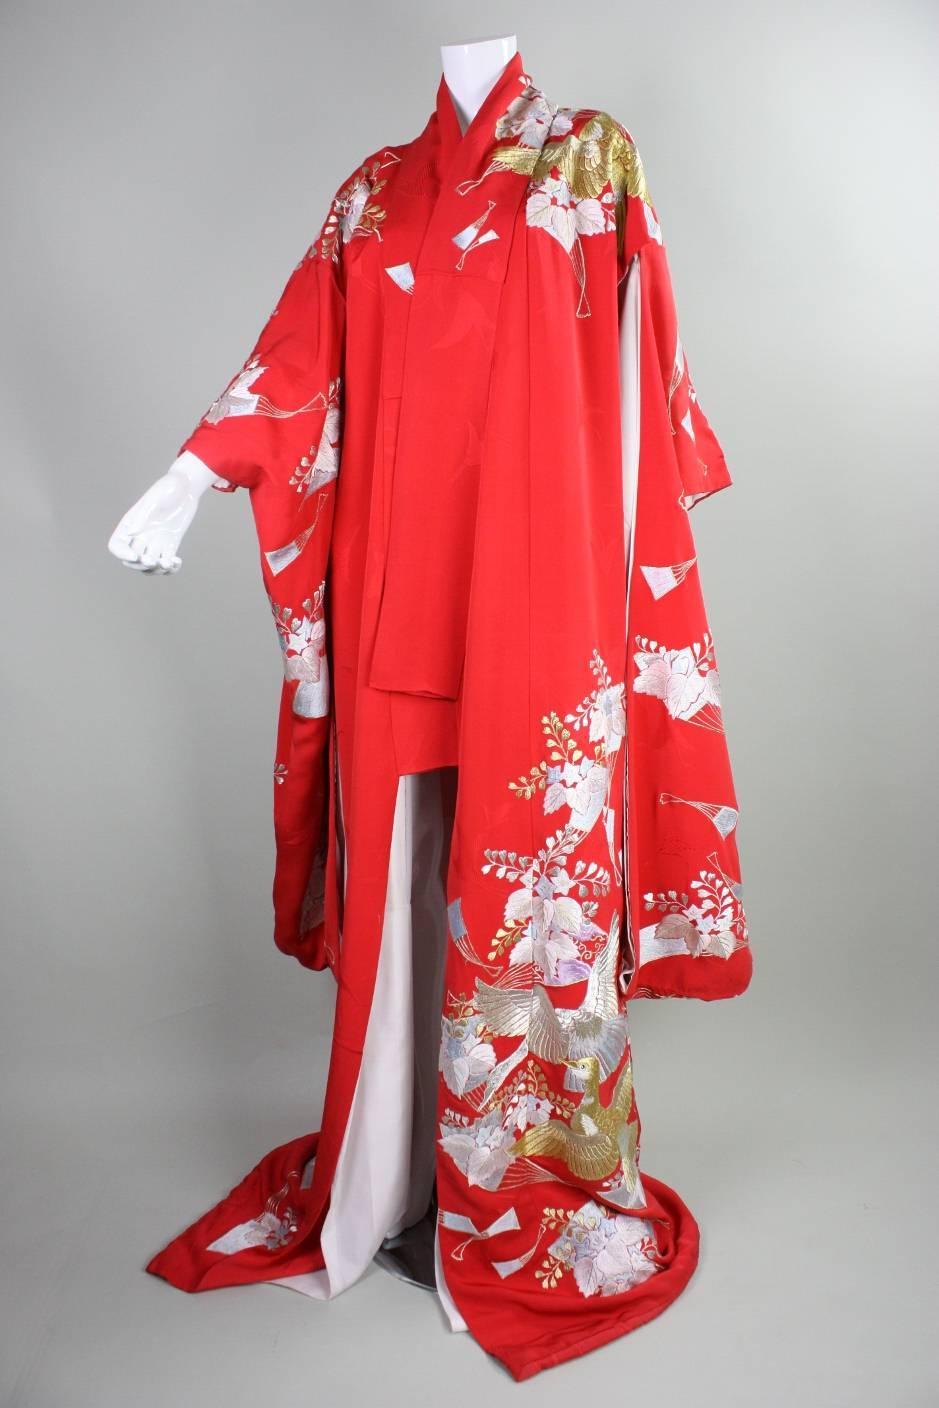 Vintage Japanese kimono features gorgeous metallic embroidery on a bright red ground. Lightly padded hem. No closures. Kimono dates to an unknown era during the 20th century.